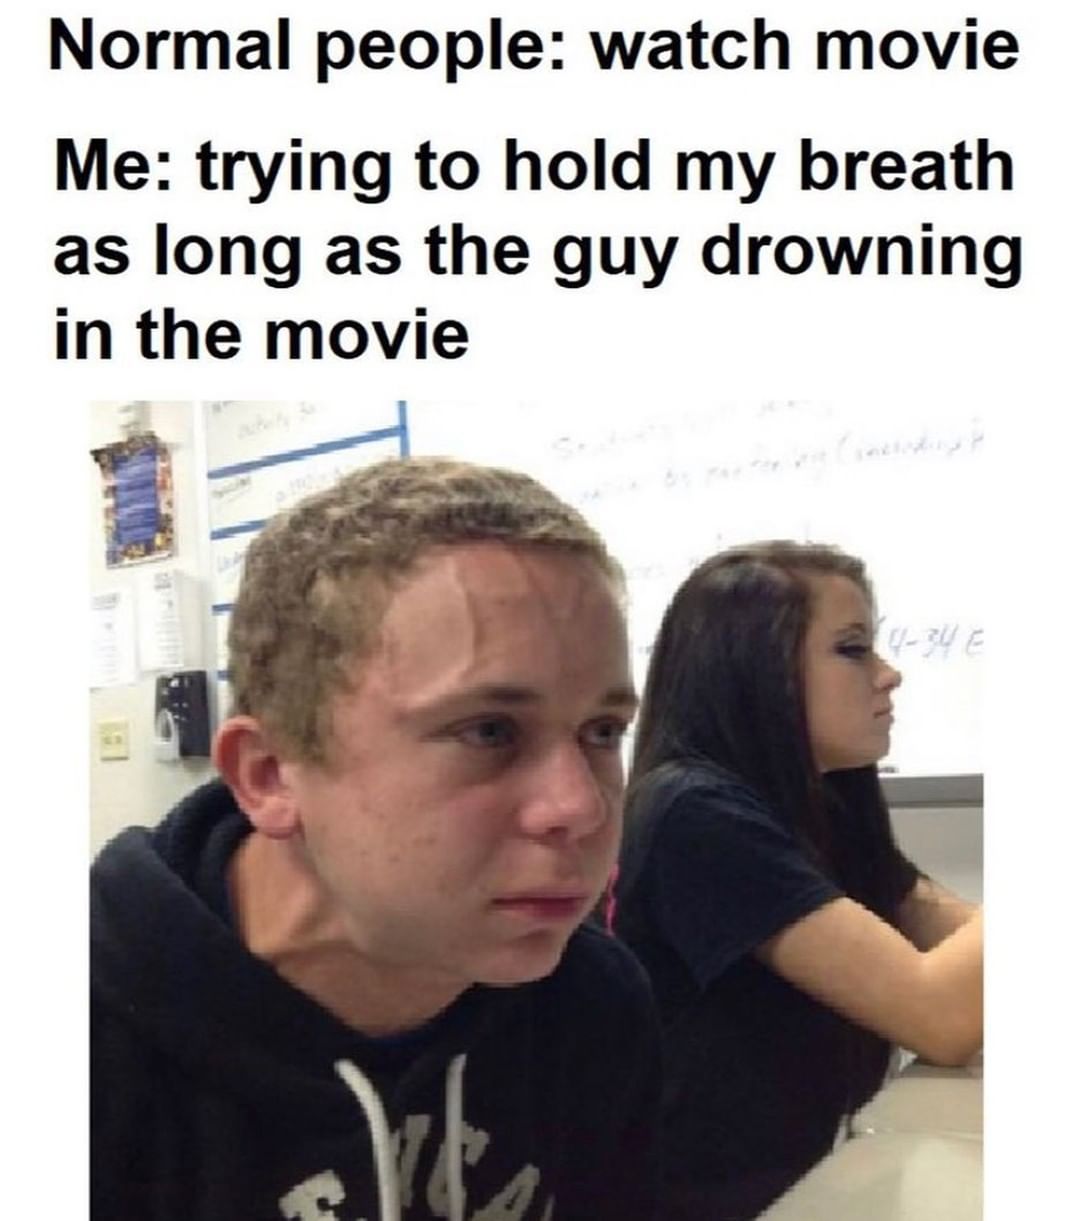 Normal people: watch movie.  Me: trying to hold my breath as long as the guy drowning in the movie.